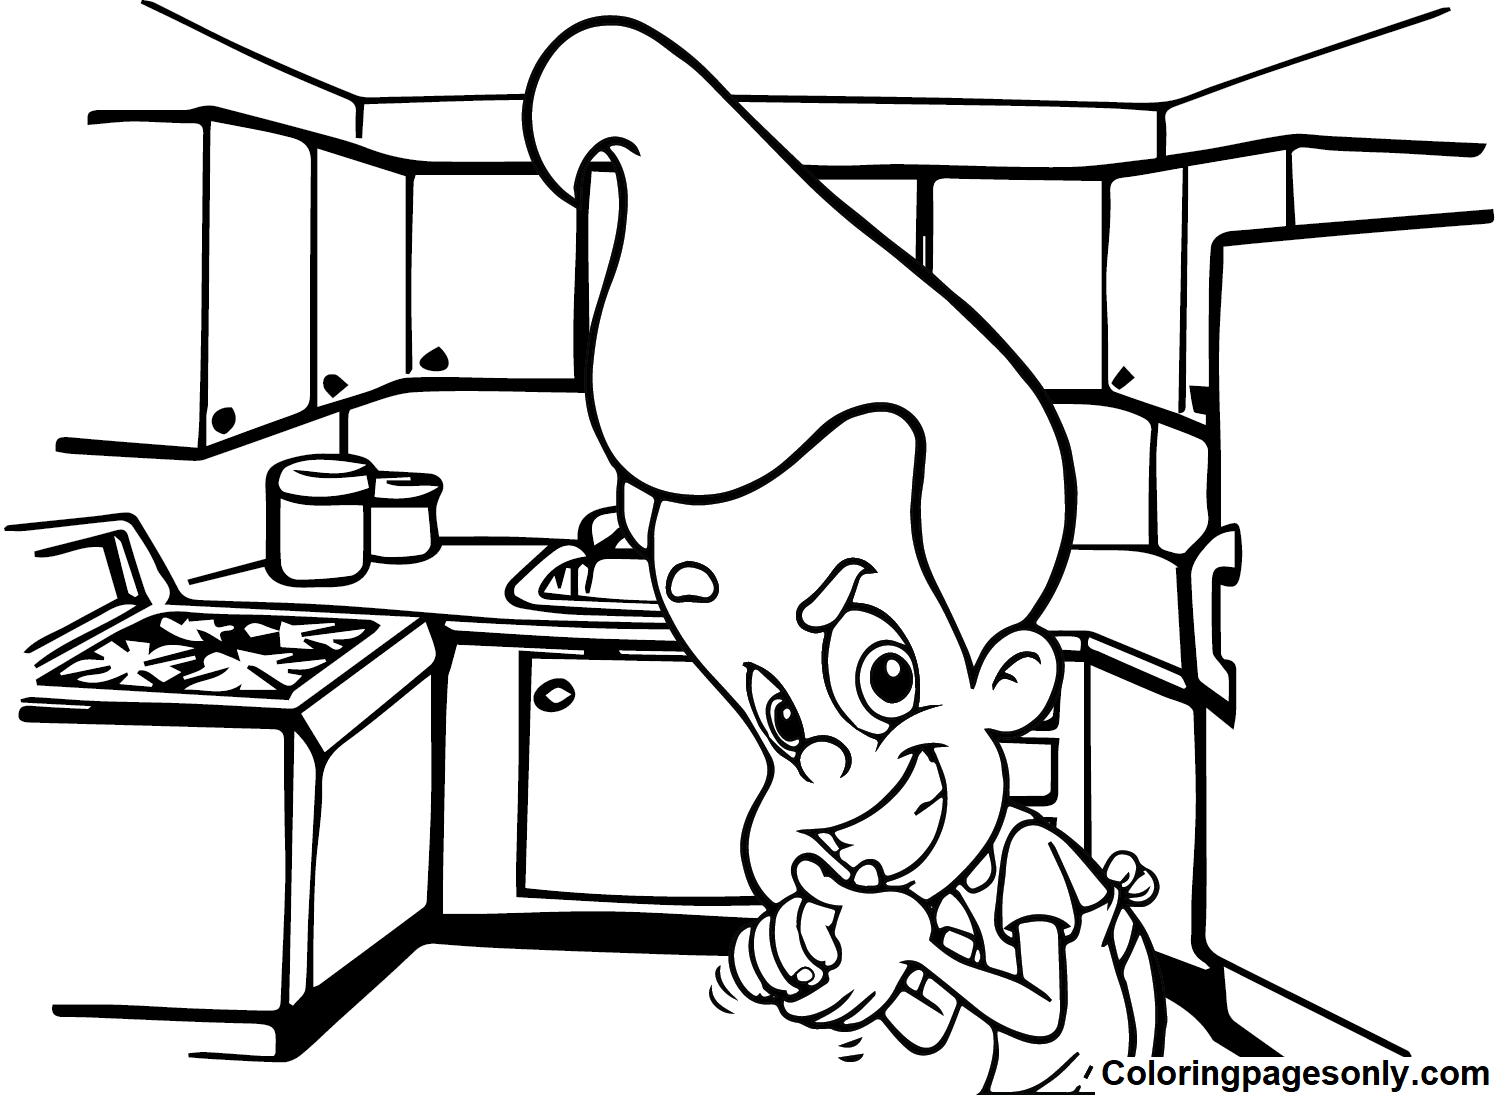 Funny Jimmy Neutron Coloring Pages